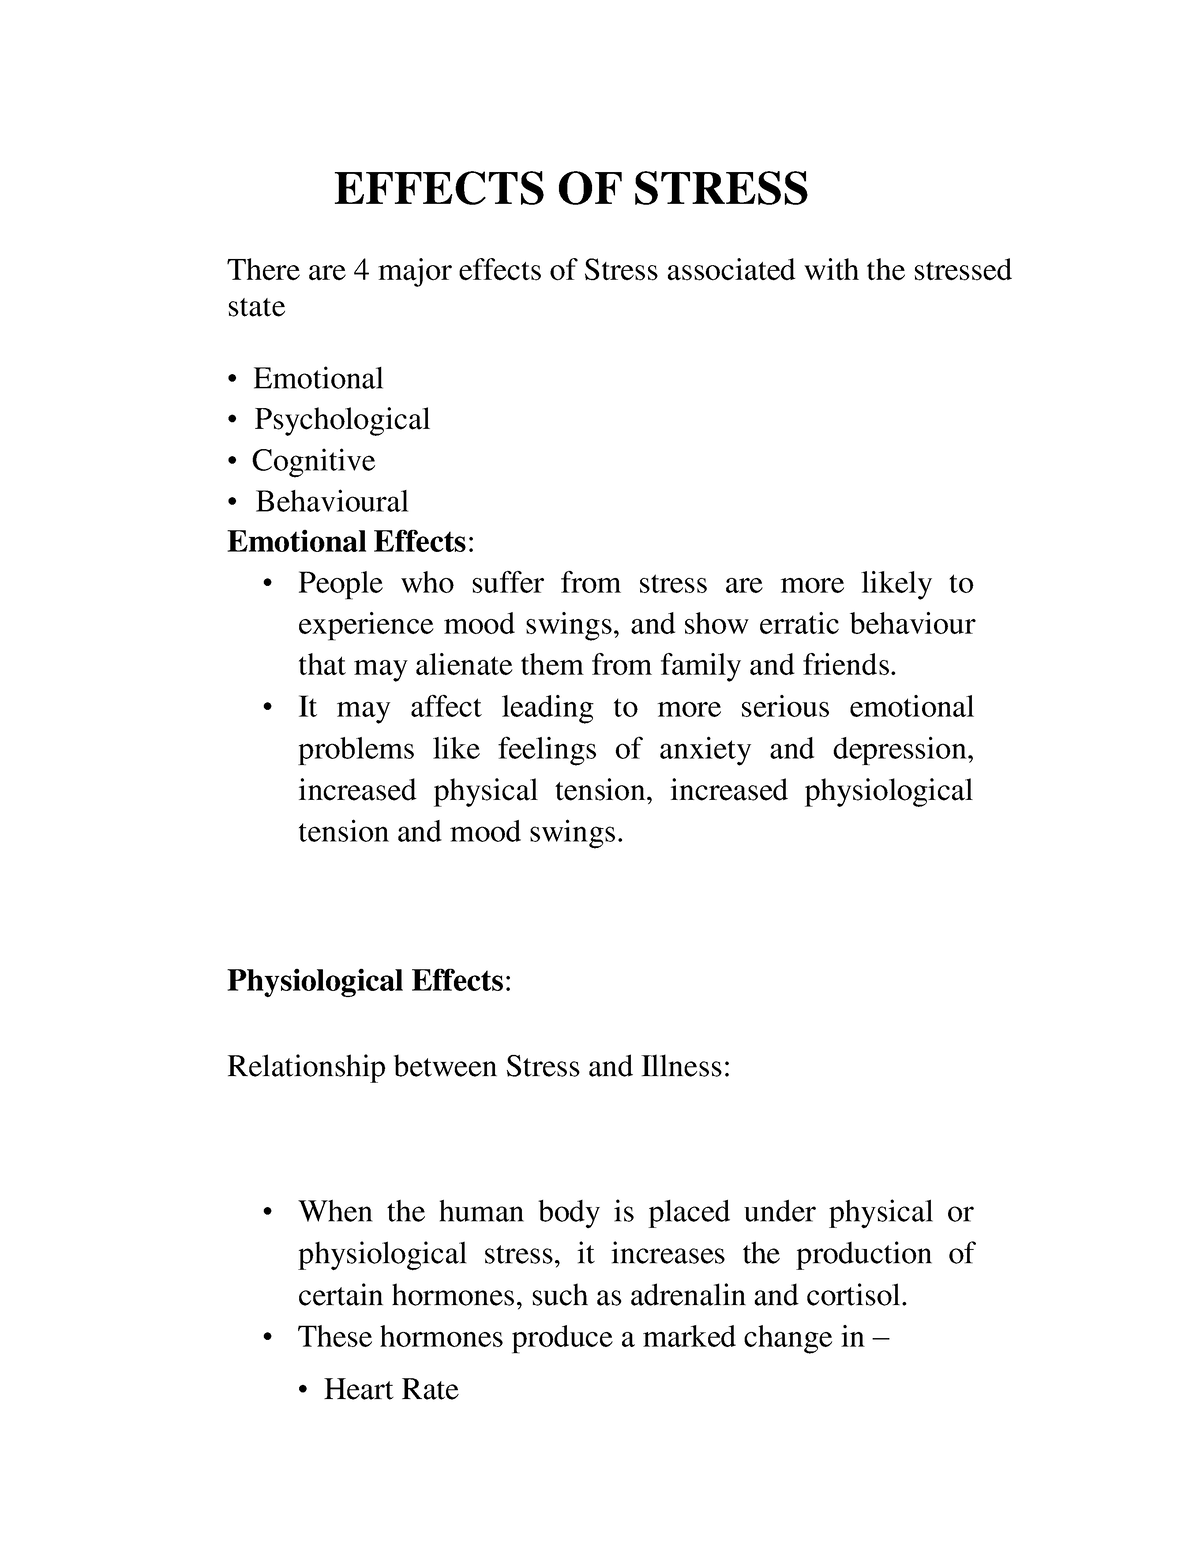 the effects of stress on human behavior research paper